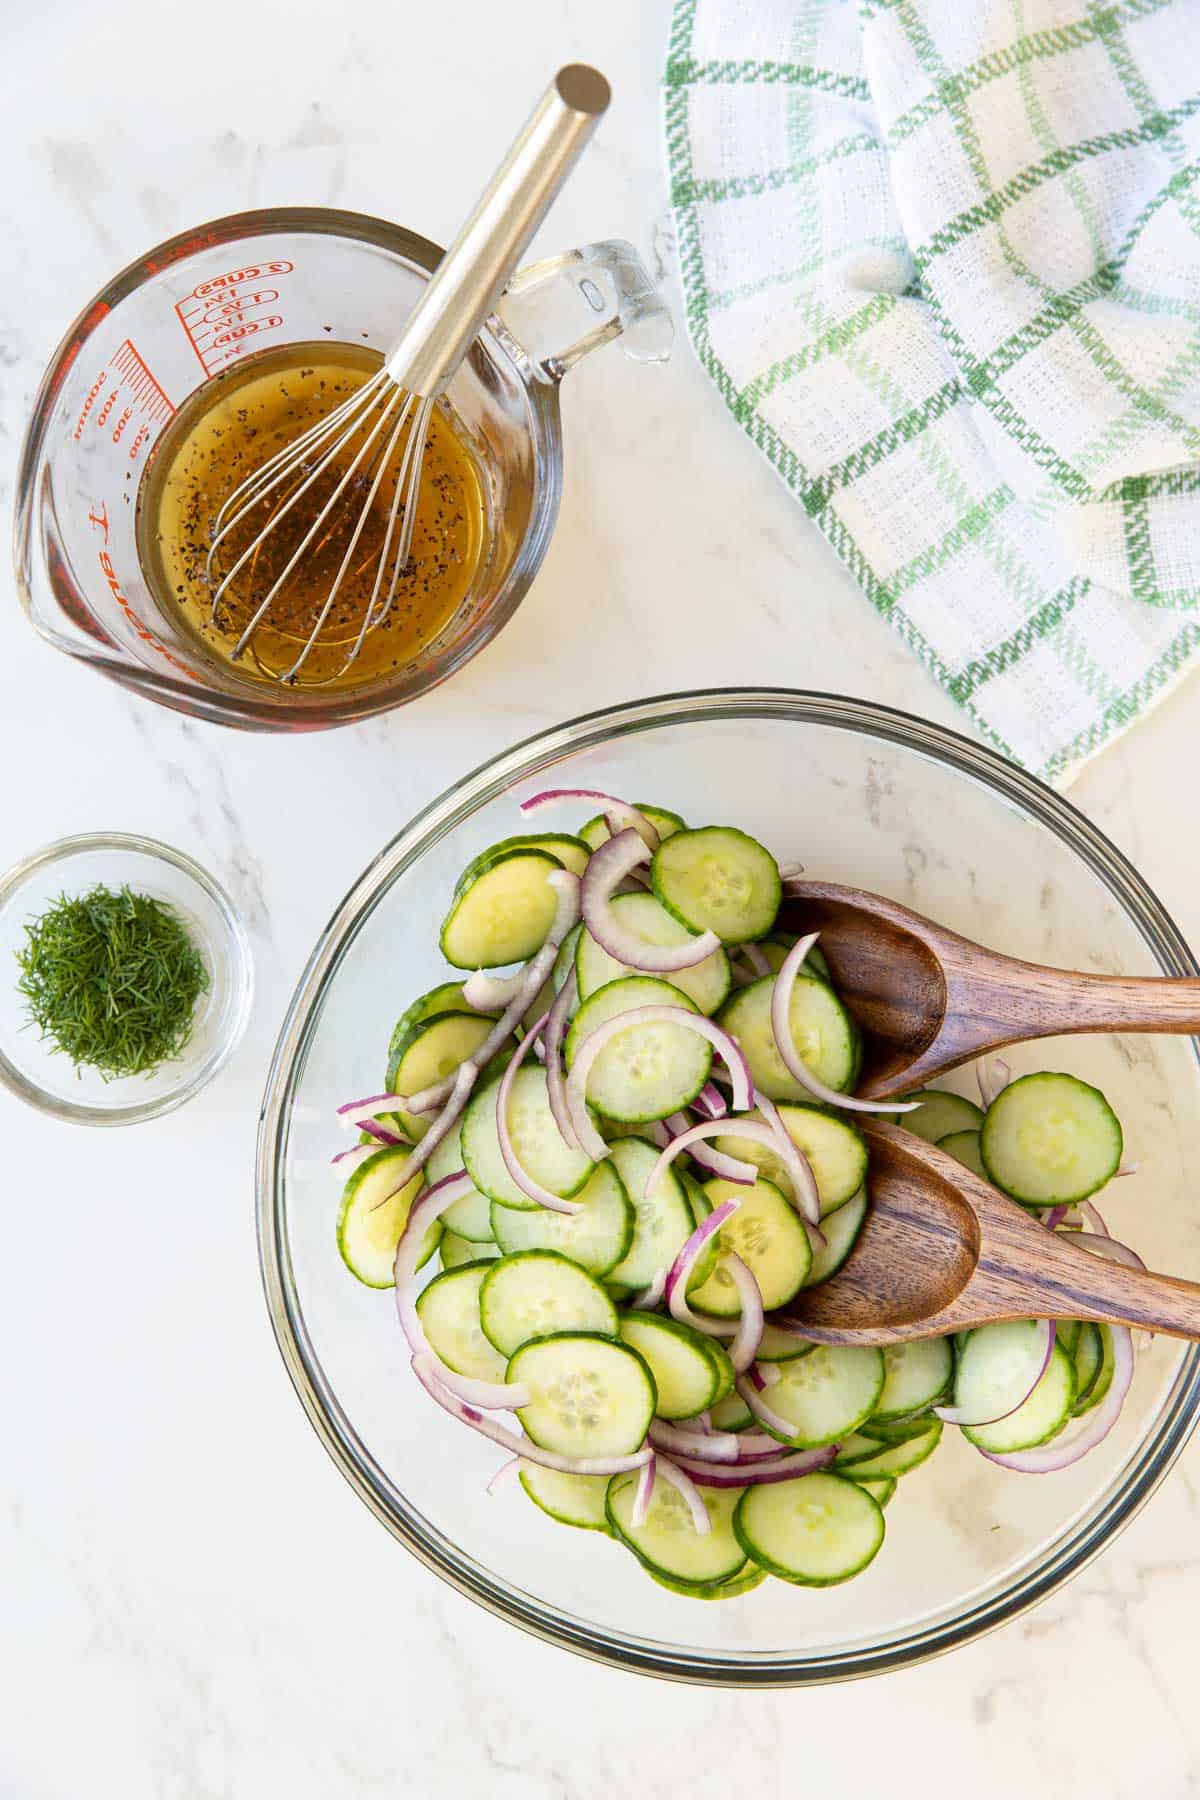 A bowl of cucumbers and onions beside a small bowl of dill and a measuring cup of vinegar mixture.